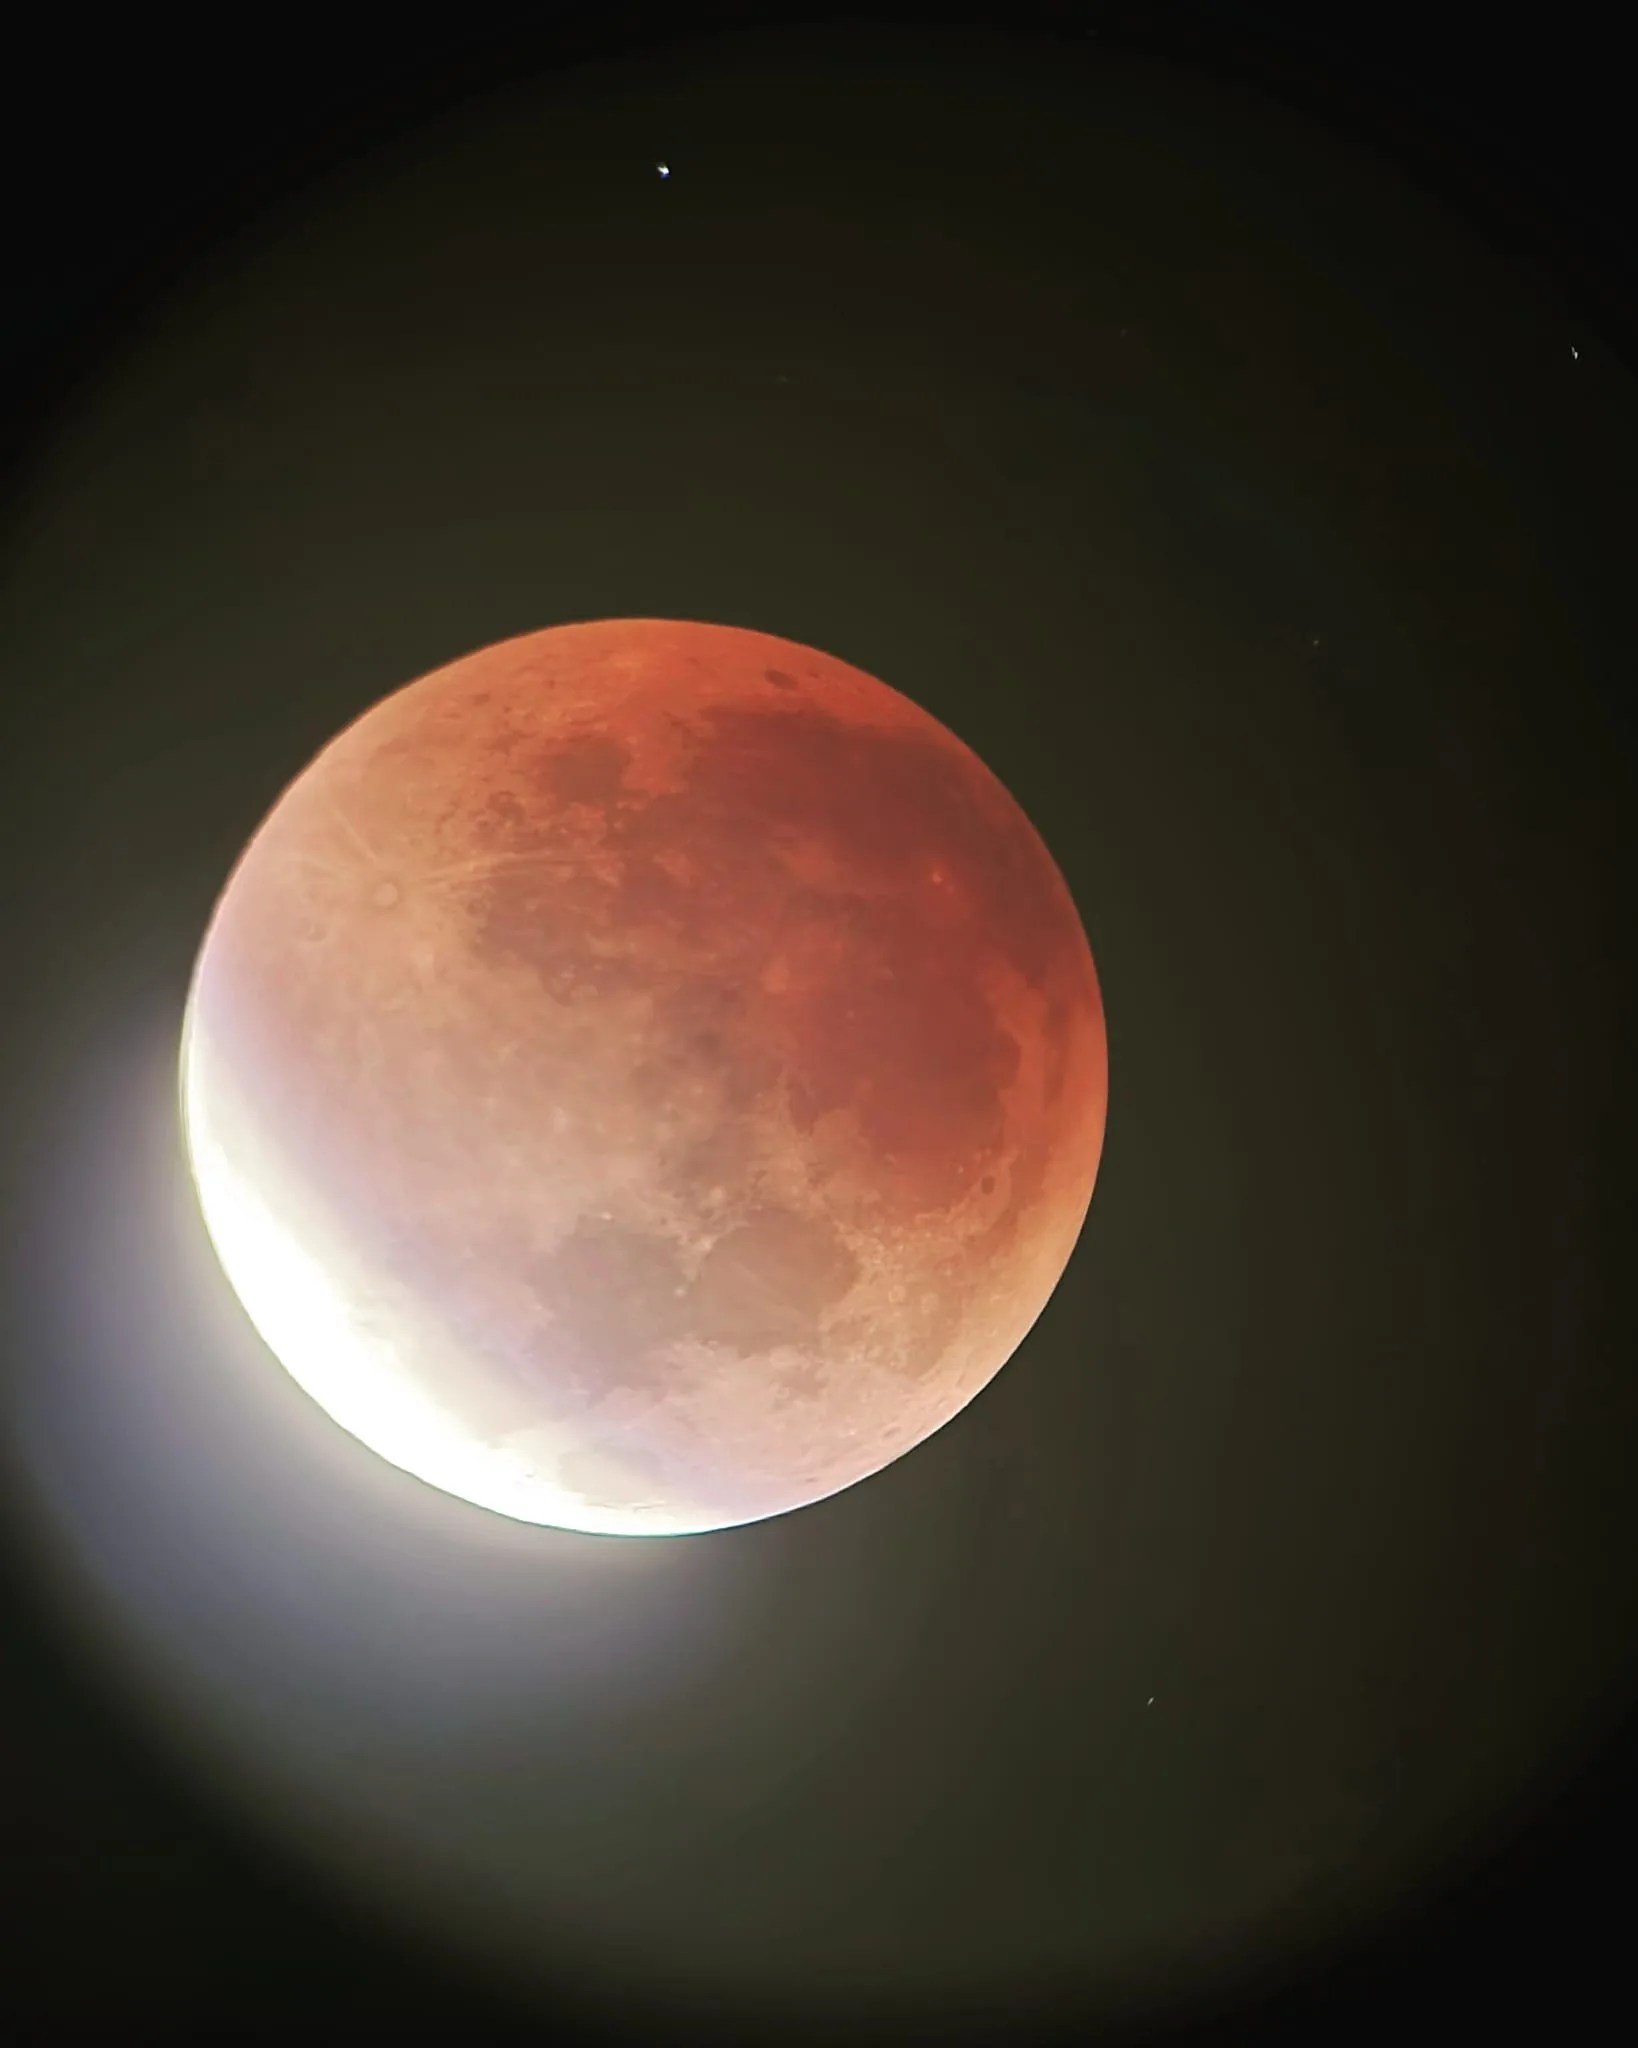 Photo of a full, red moon during the Lunar Eclipse.